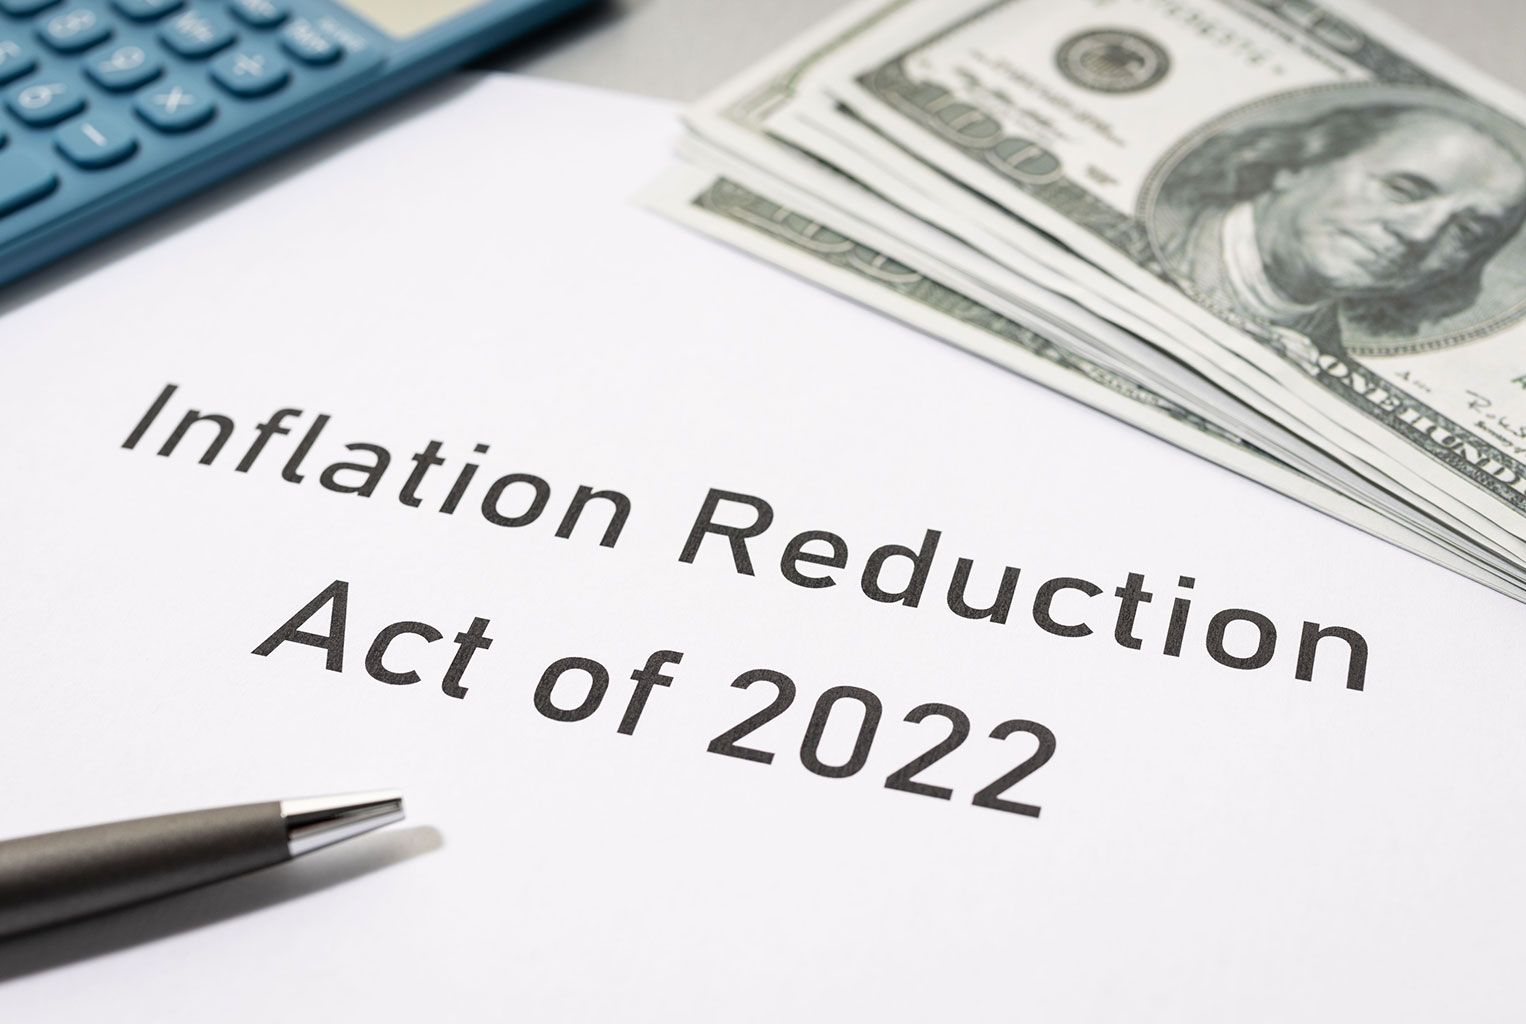 inflation-reduction-act-provisions-of-interest-to-small-businesses-nksfb-llc